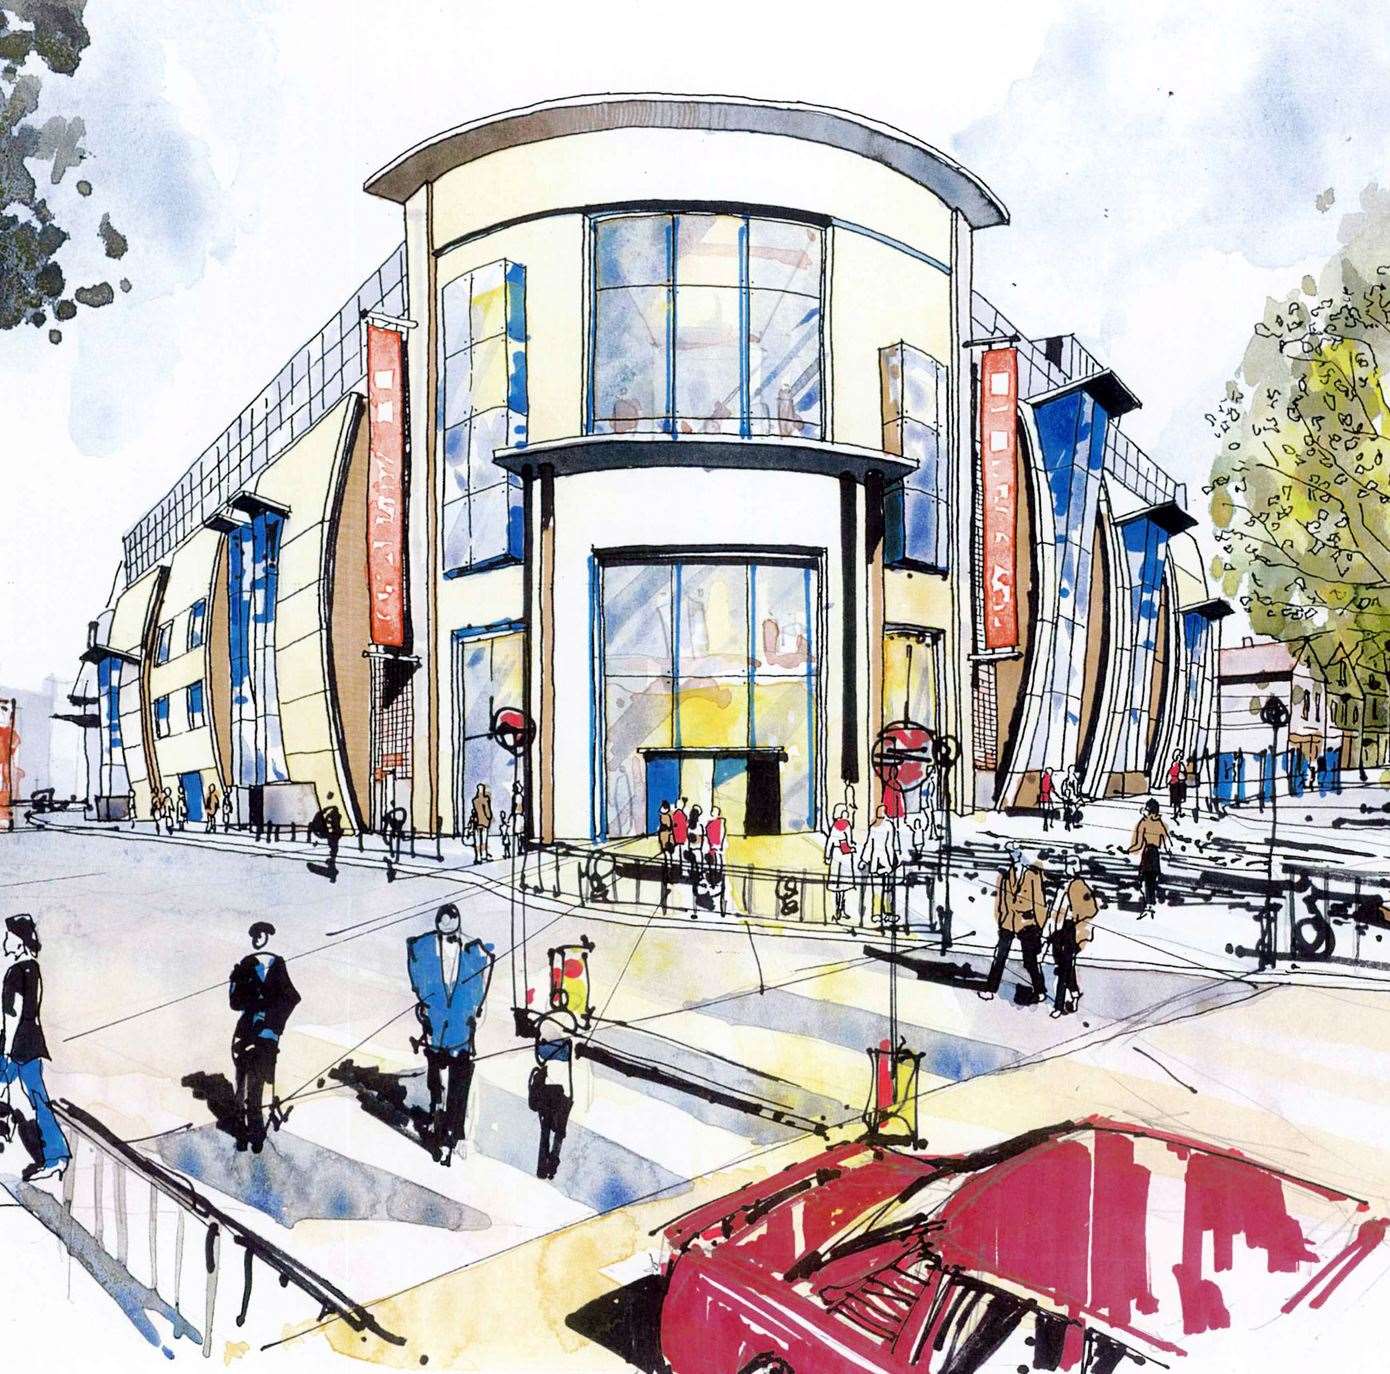 Developers released this artist’s impression of the centre’s extension back in 2003